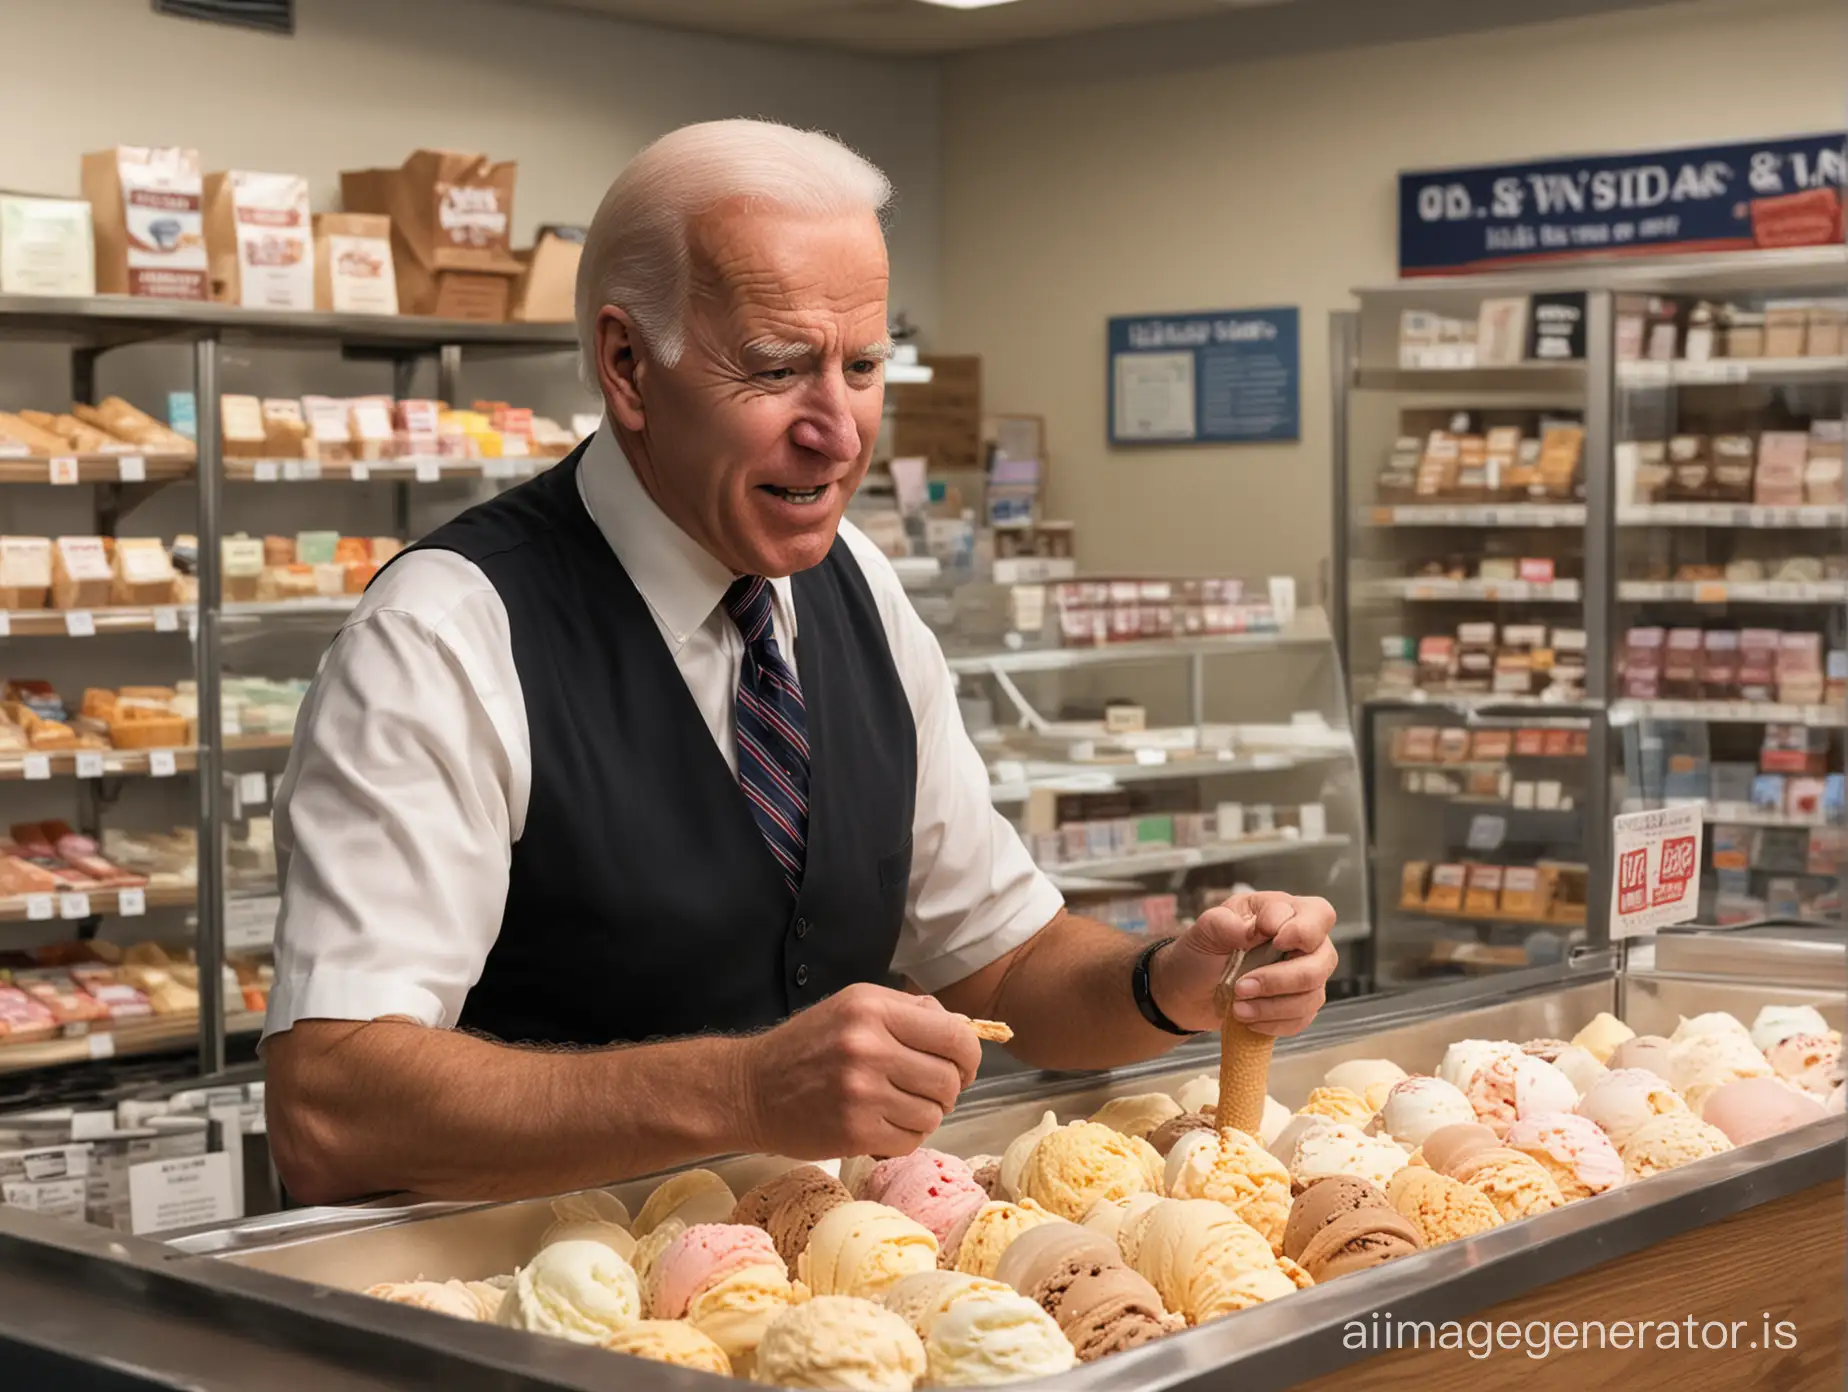 Simulate Joe Biden taking orders at the ice cream shop and checking the quality of the products in the store.